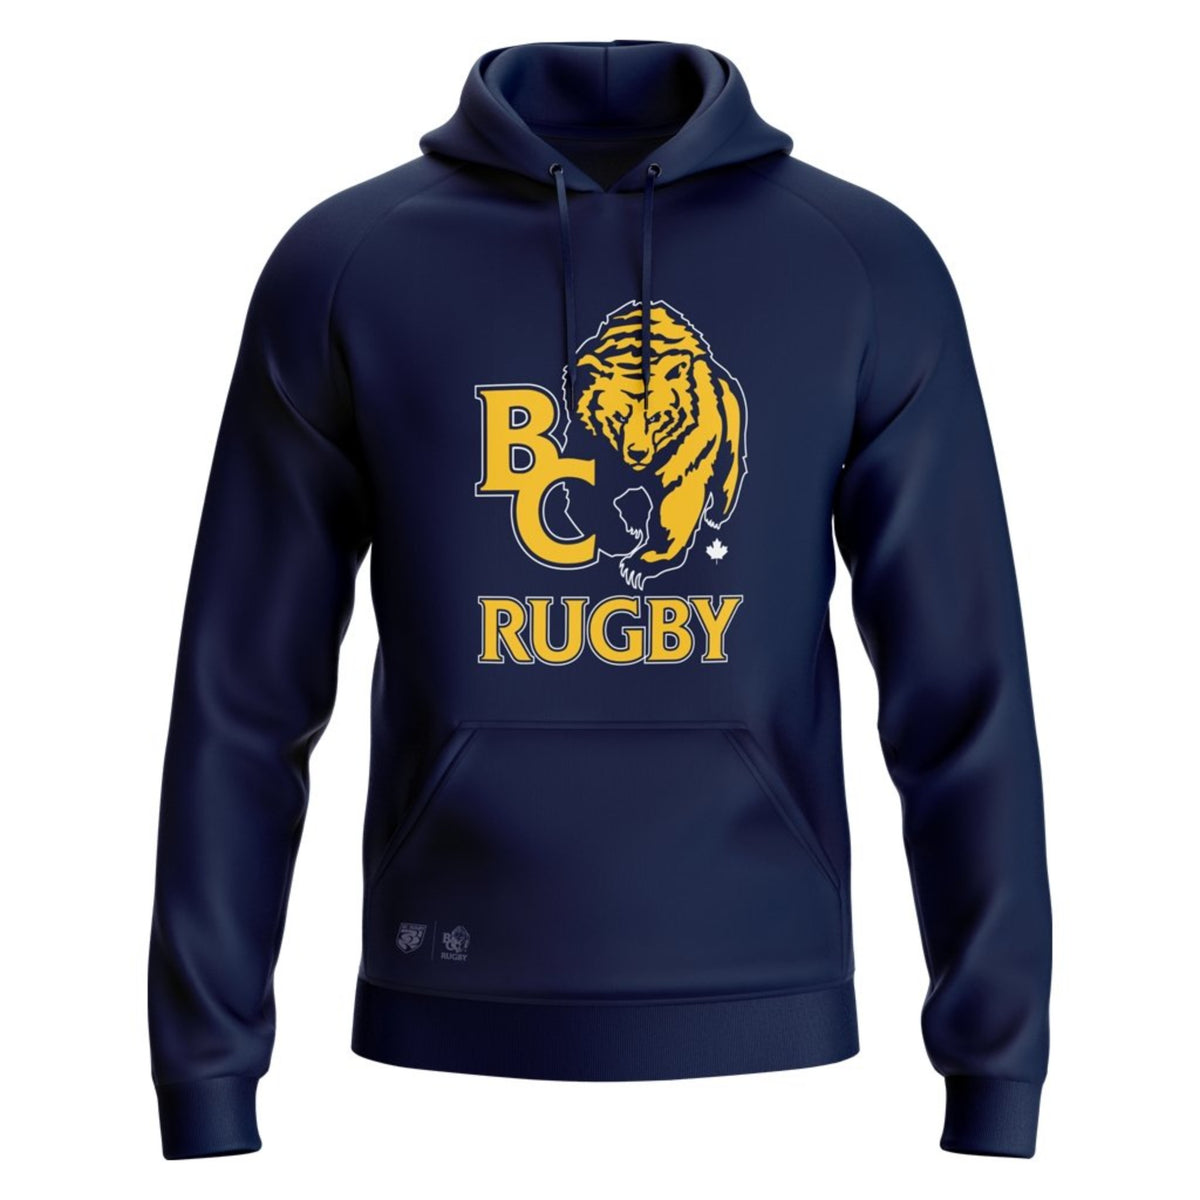 BC Rugby 2021 &quot;LArge Logo Team&quot; Hoodie - Youth Unisex - www.therugbyshop.com www.therugbyshop.com YOUTH / NAVY / S XIX Brands HOODIES BC Rugby 2021 &quot;LArge Logo Team&quot; Hoodie - Youth Unisex